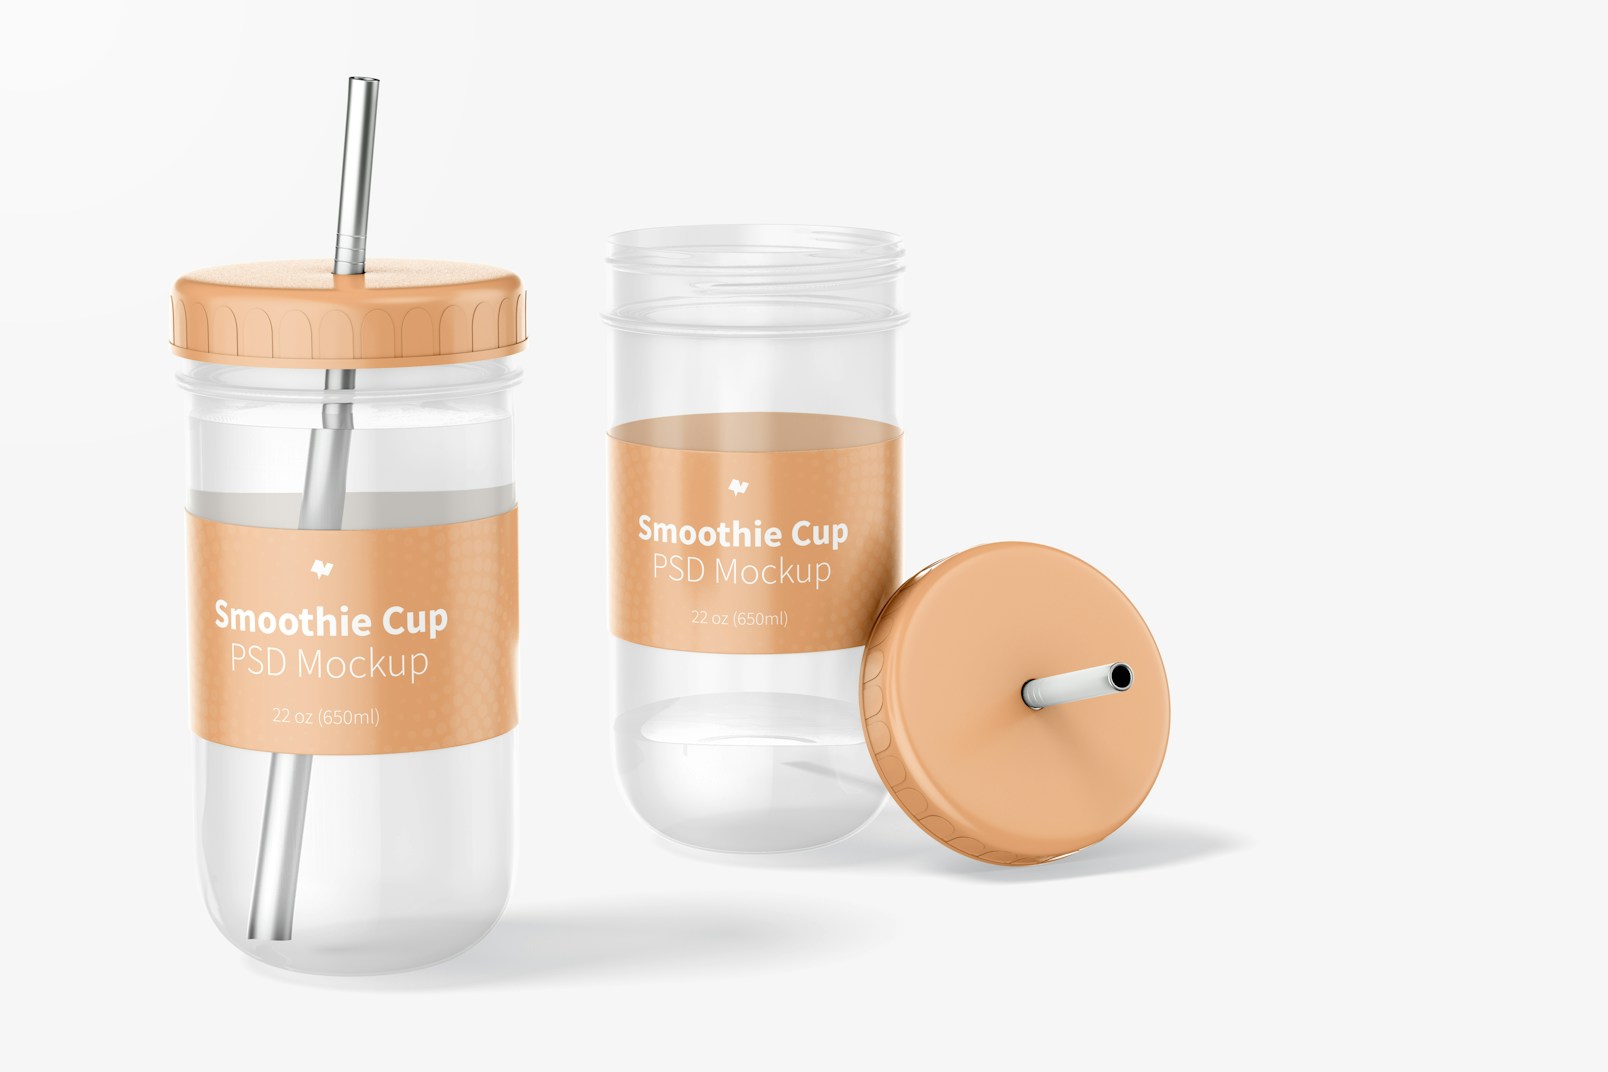 Smoothie Cups with Lid Mockup